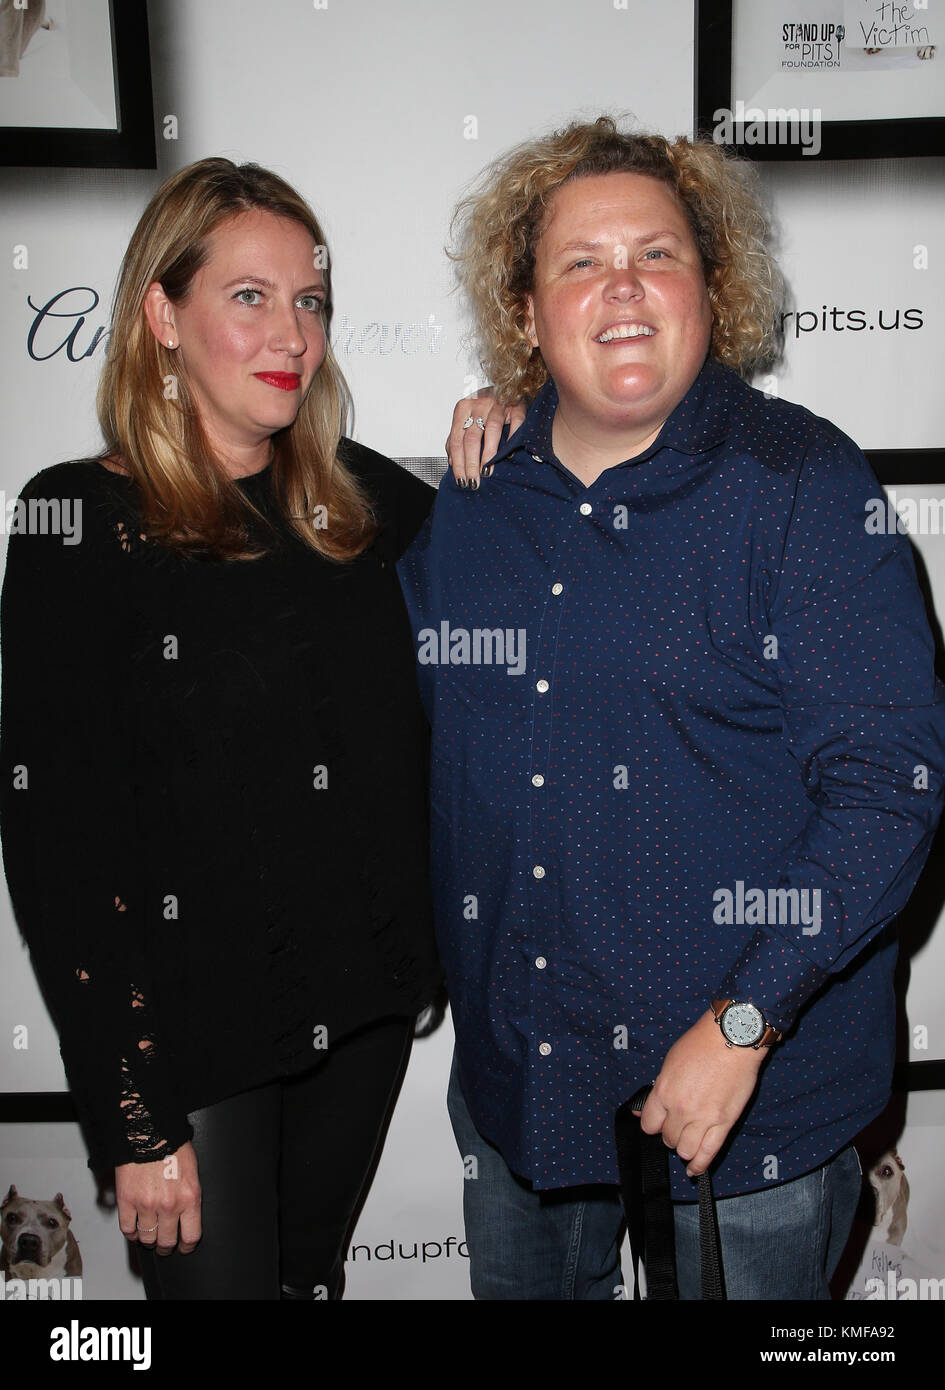 https://c8.alamy.com/comp/KMFA92/7th-annual-stand-up-for-pits-featuring-jacquelyn-smith-fortune-feimster-KMFA92.jpg